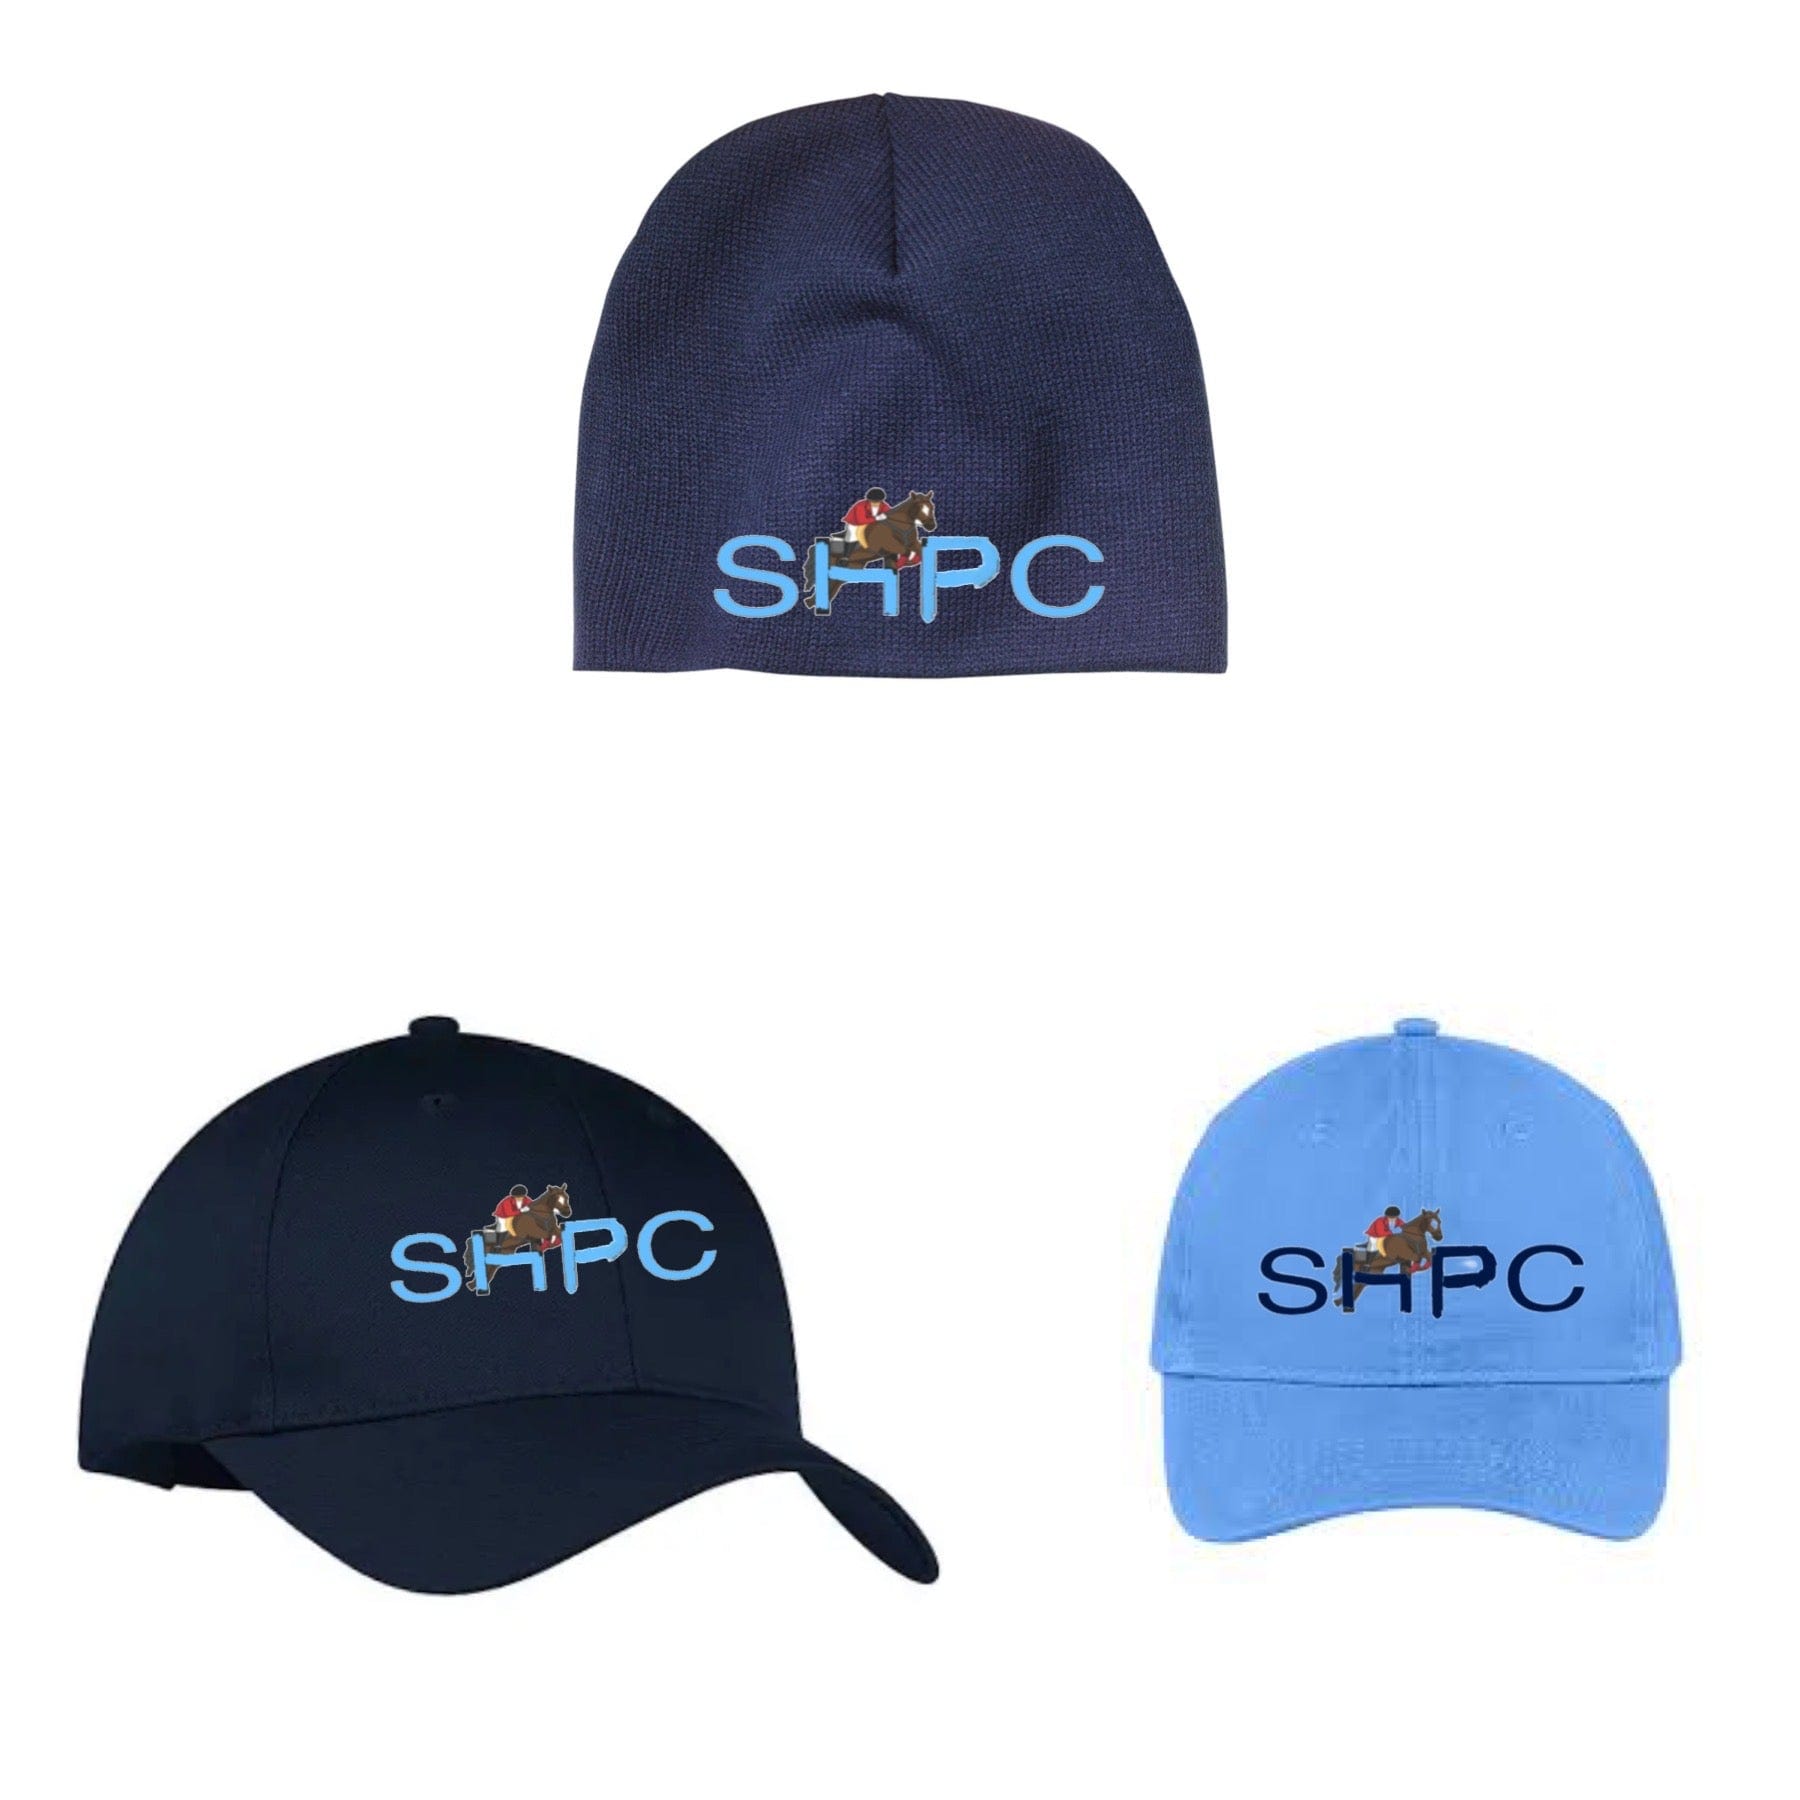 Equestrian Team Apparel SHPC Baseball Cap and Beanie equestrian team apparel online tack store mobile tack store custom farm apparel custom show stable clothing equestrian lifestyle horse show clothing riding clothes horses equestrian tack store